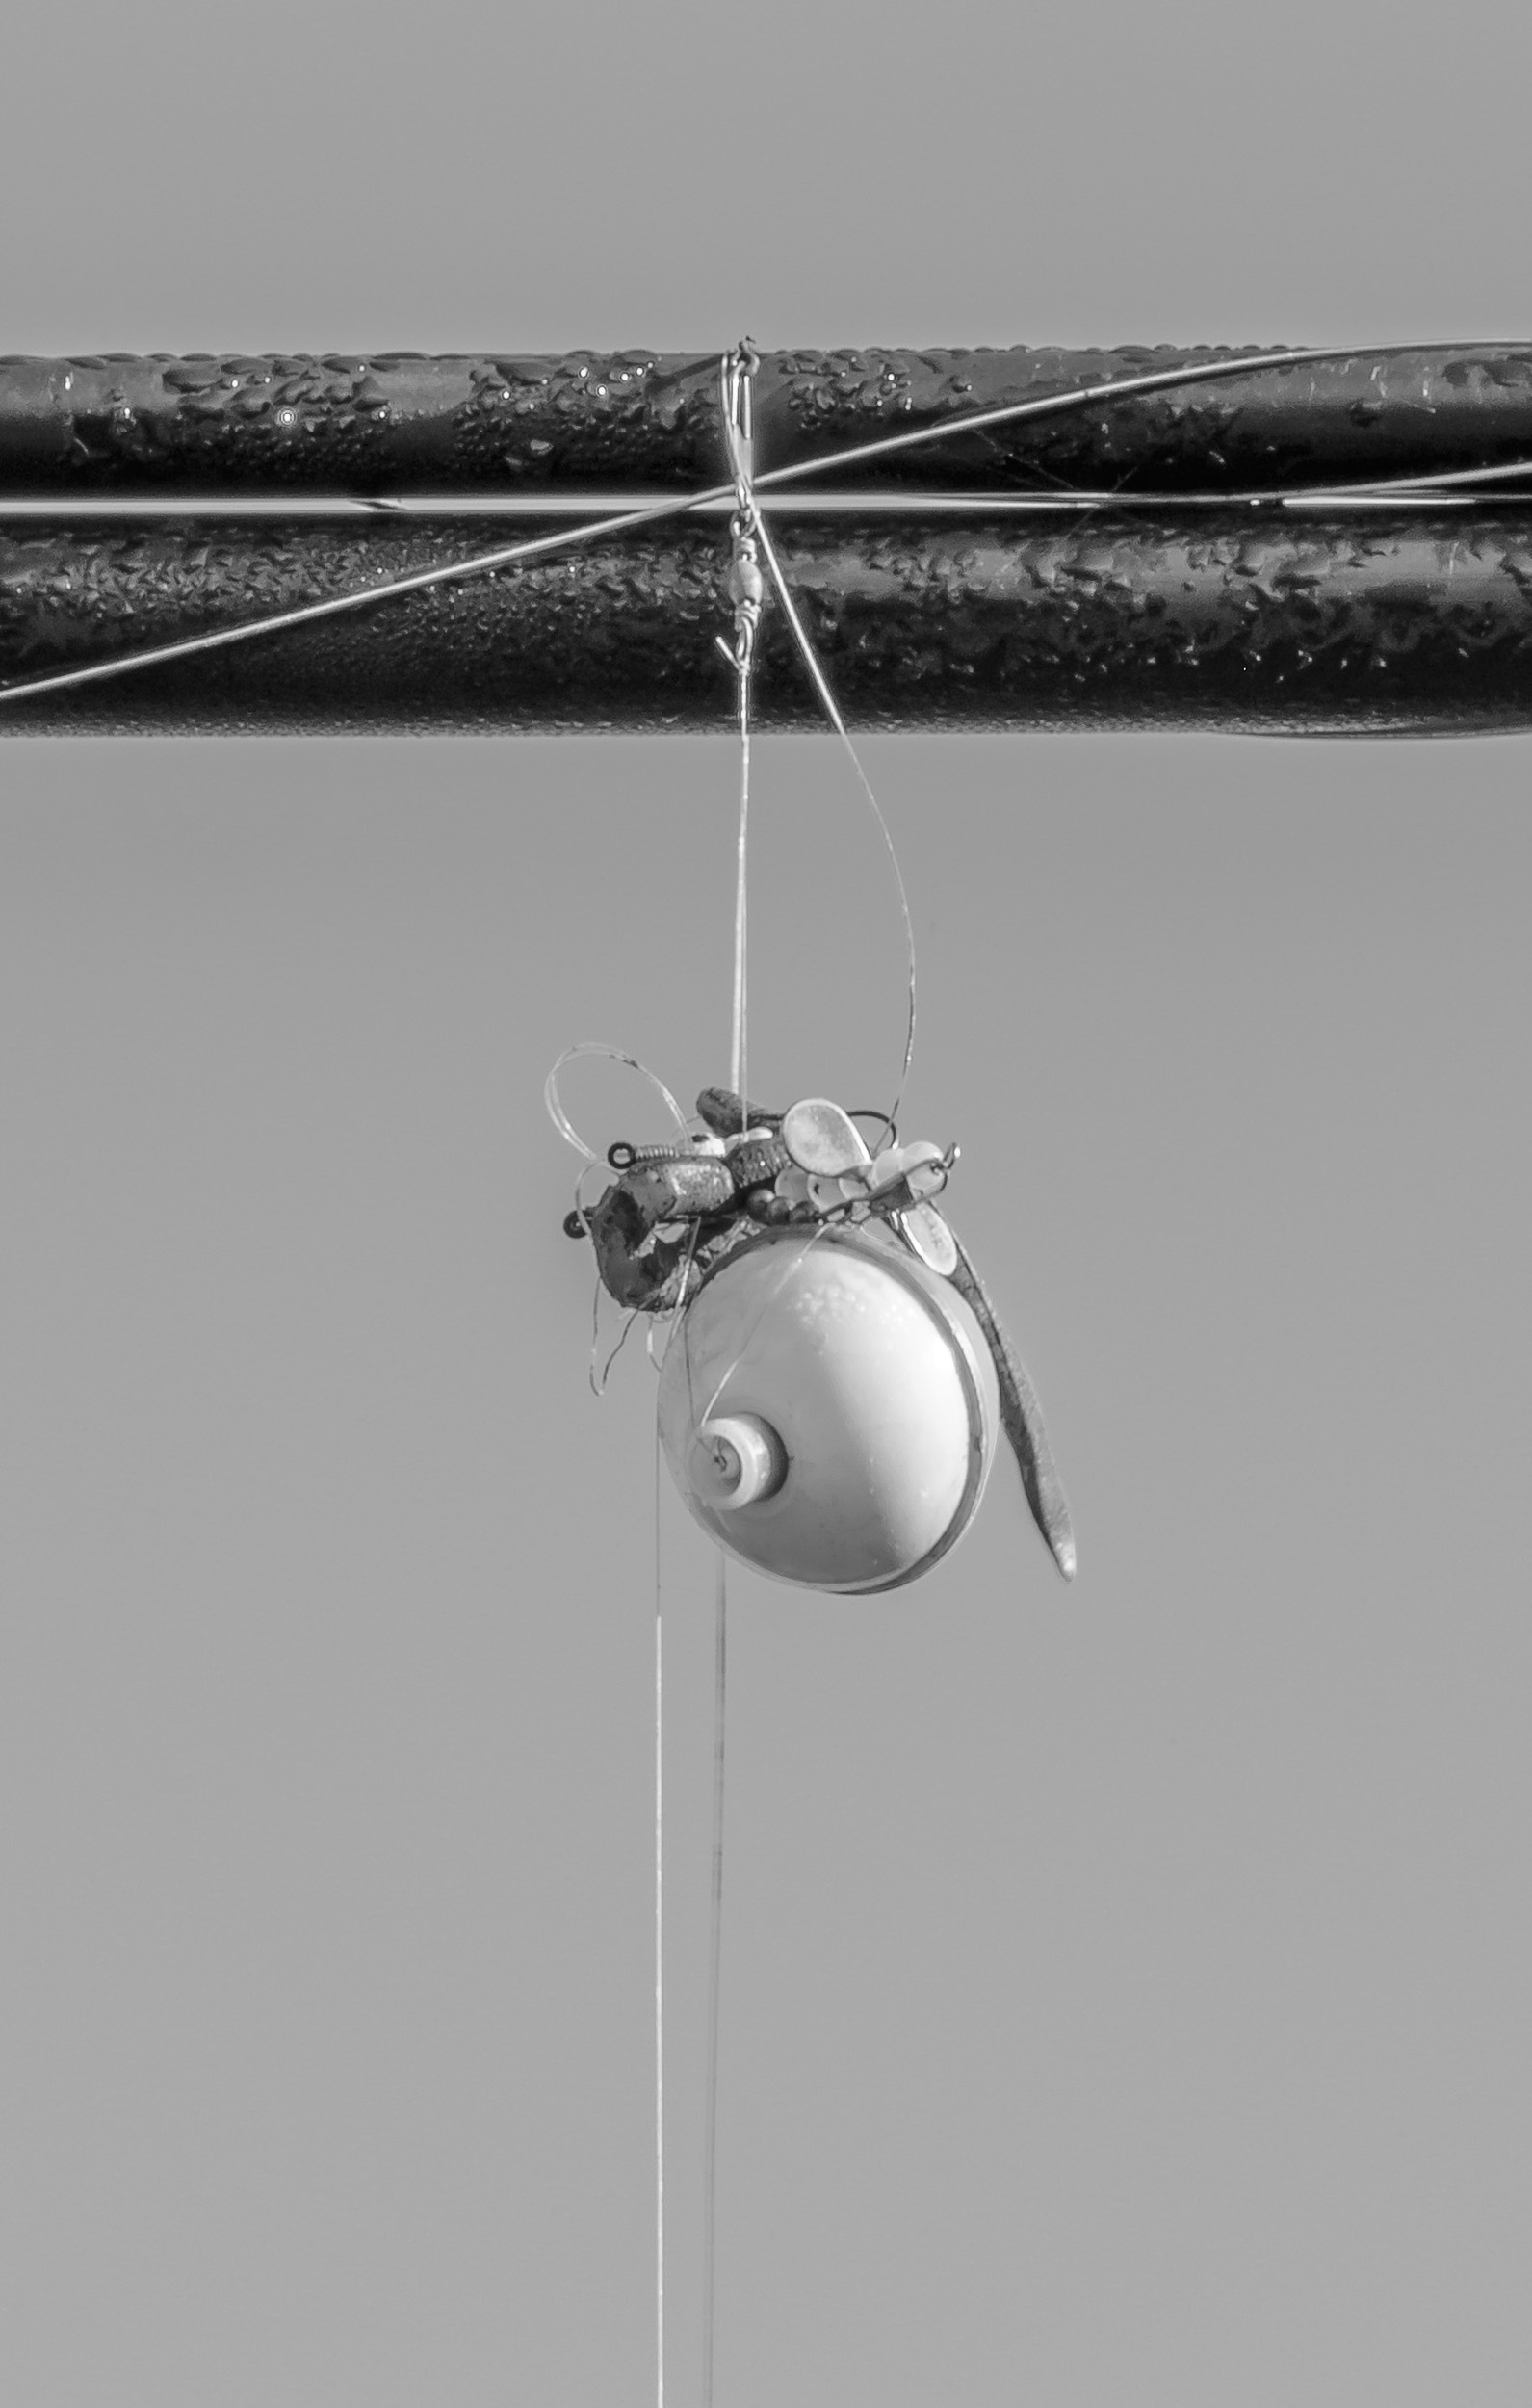 float and small creature bait on a few strands of fishing line hanging from utility line